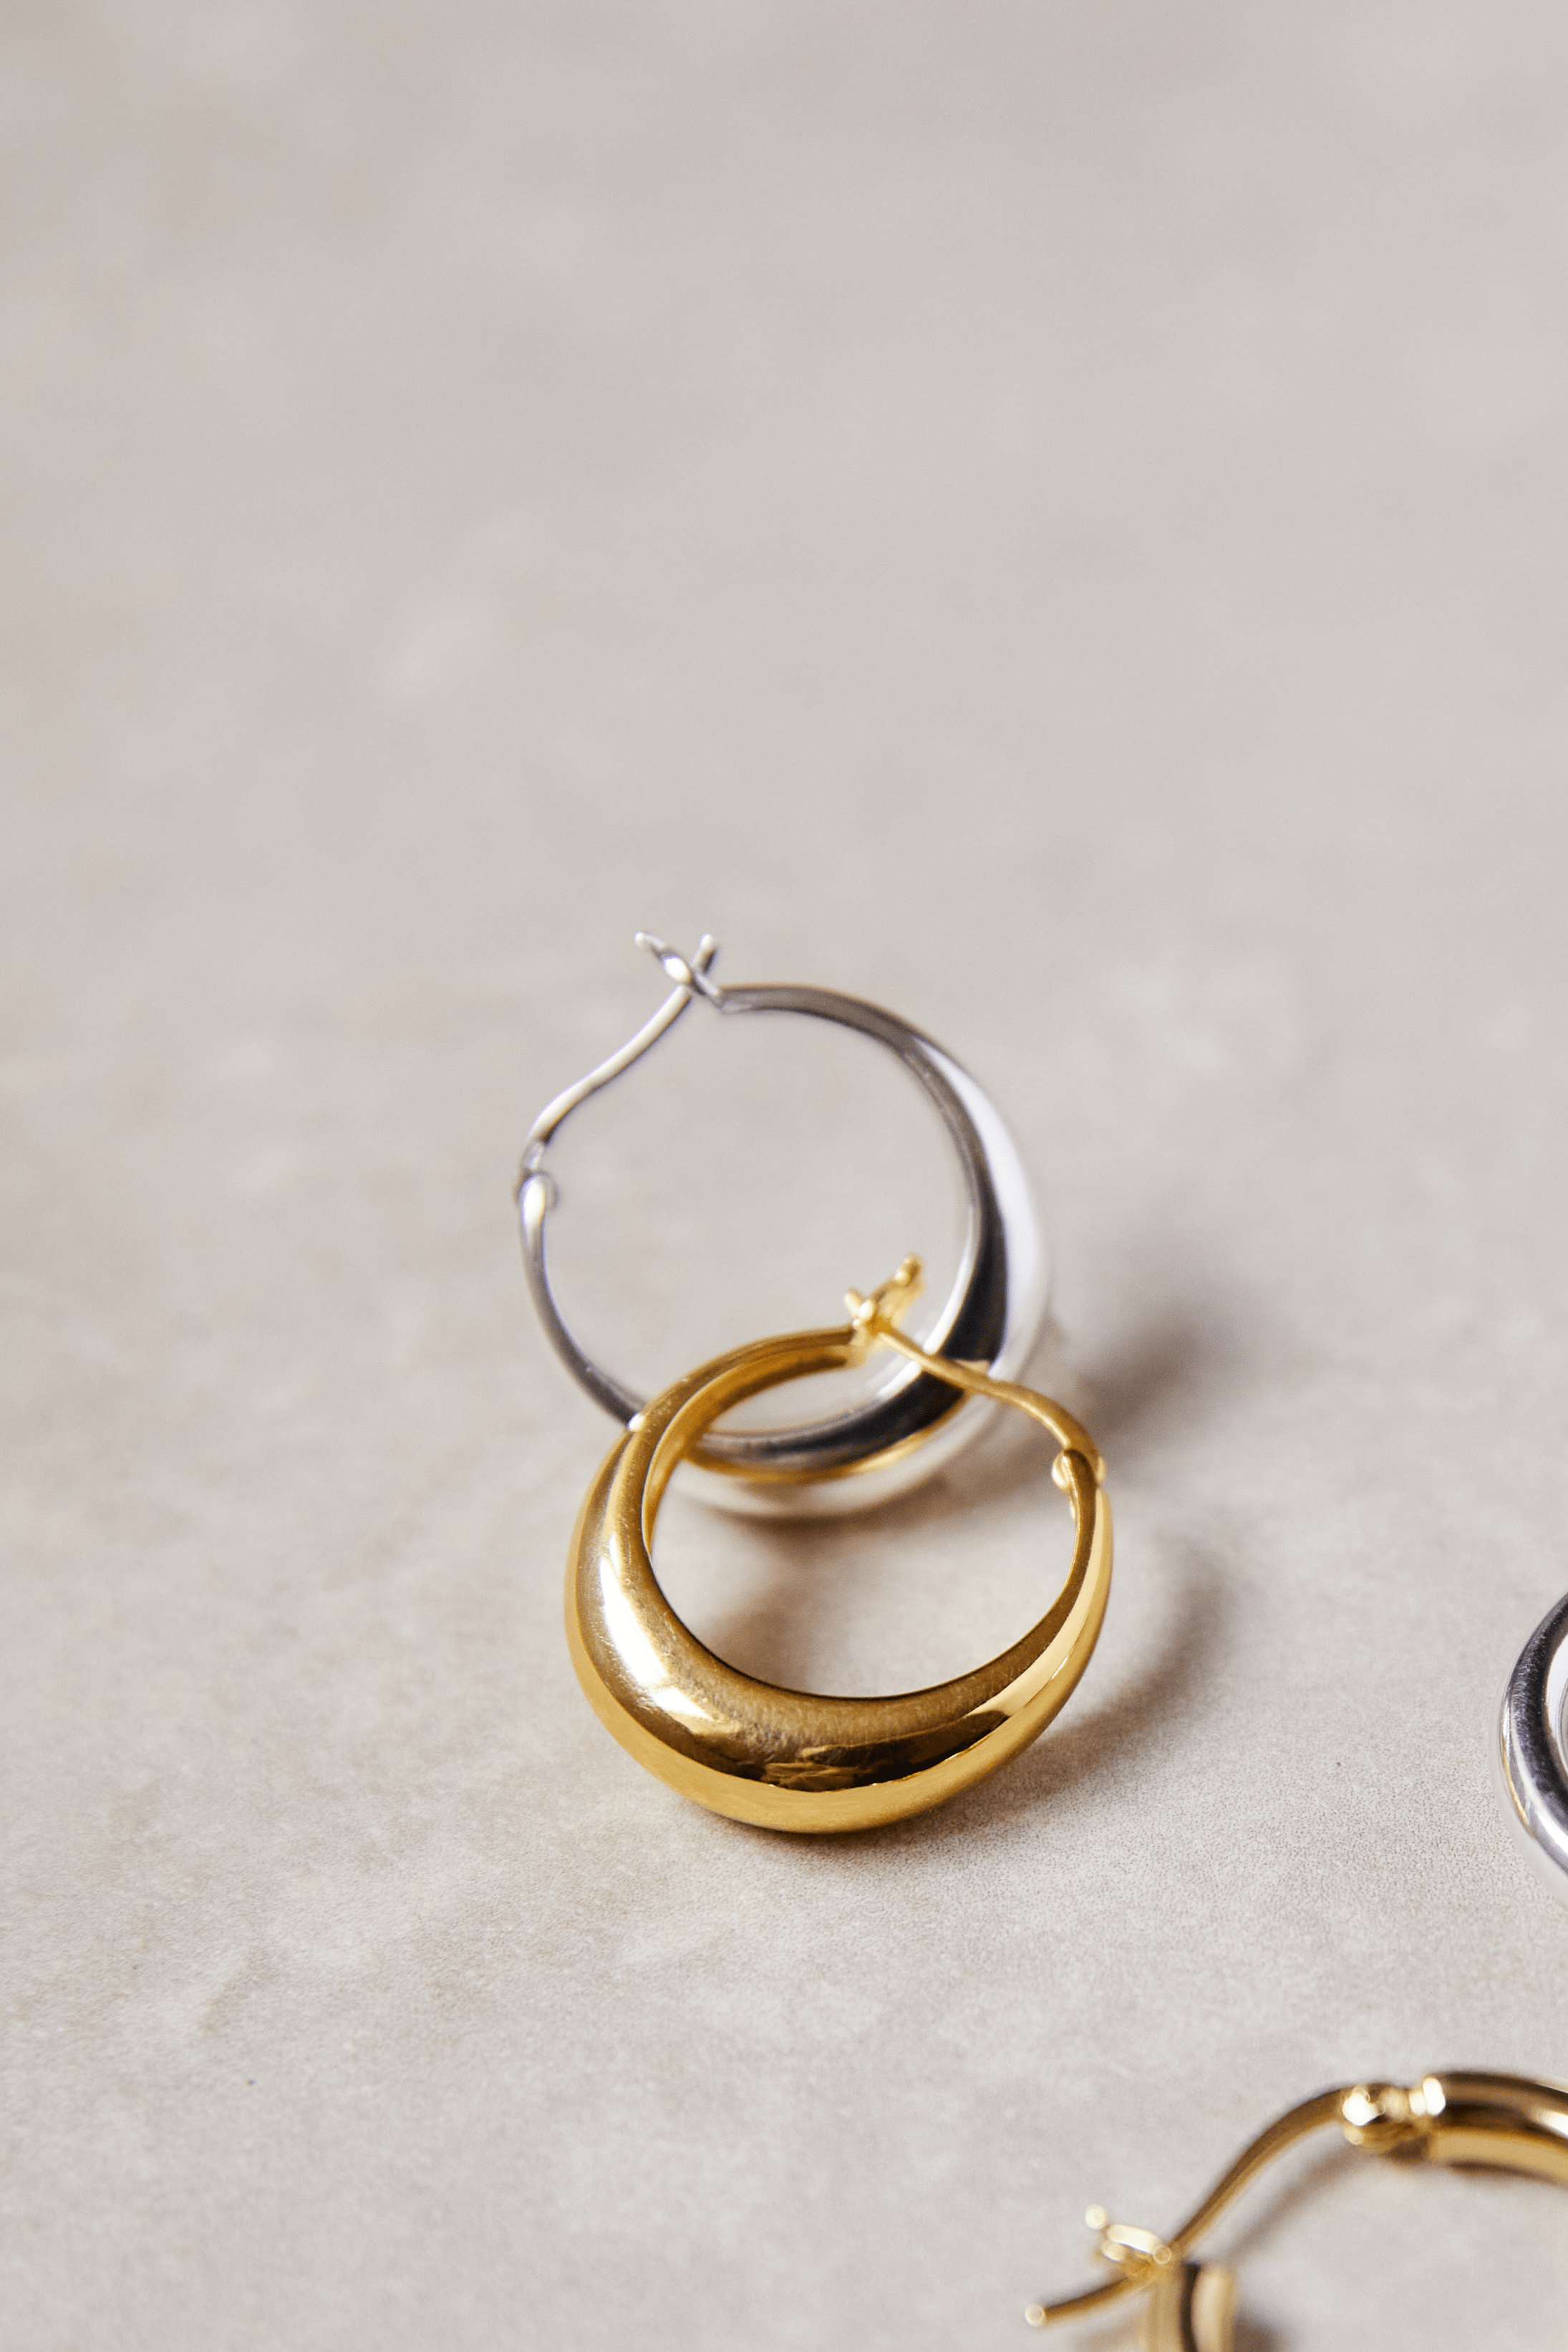 Eloma Boat Shaped Earrings - Recycled Silver Gold Plated